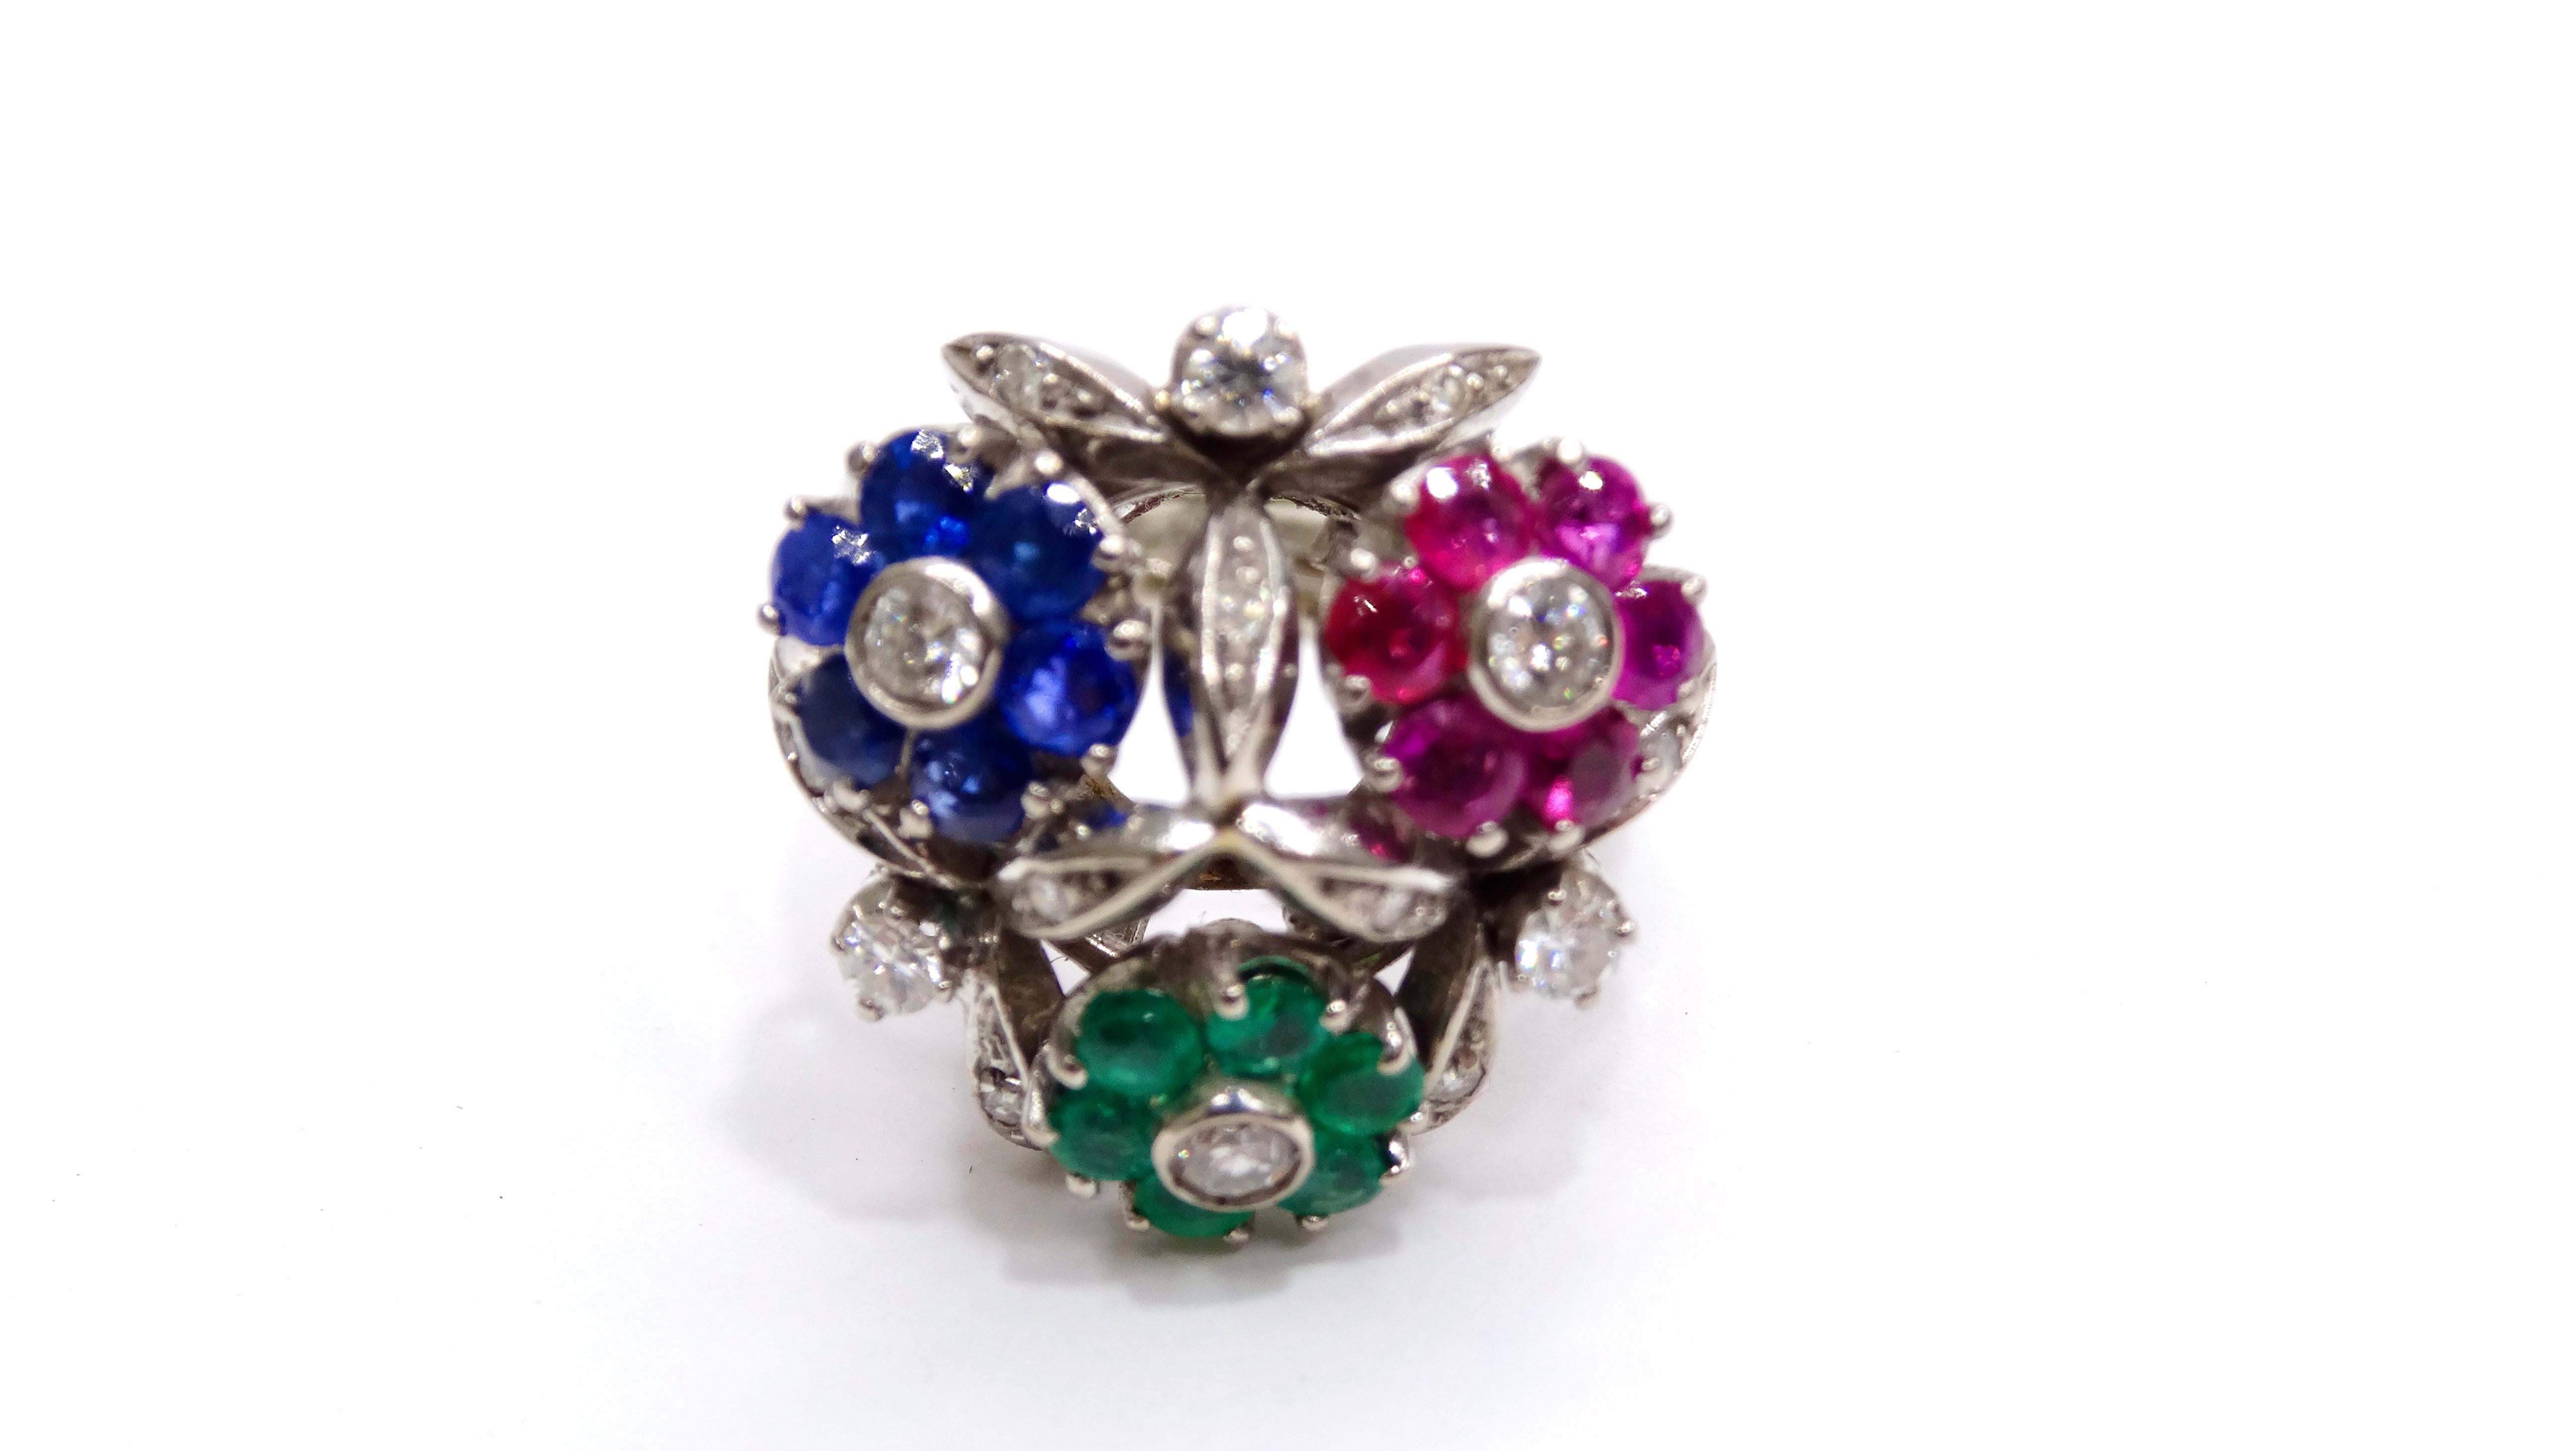 Van Cleef & Arples Platinum Floral Cocktail Ring Ruby, Emerald, Sapphires  In Good Condition For Sale In Scottsdale, AZ